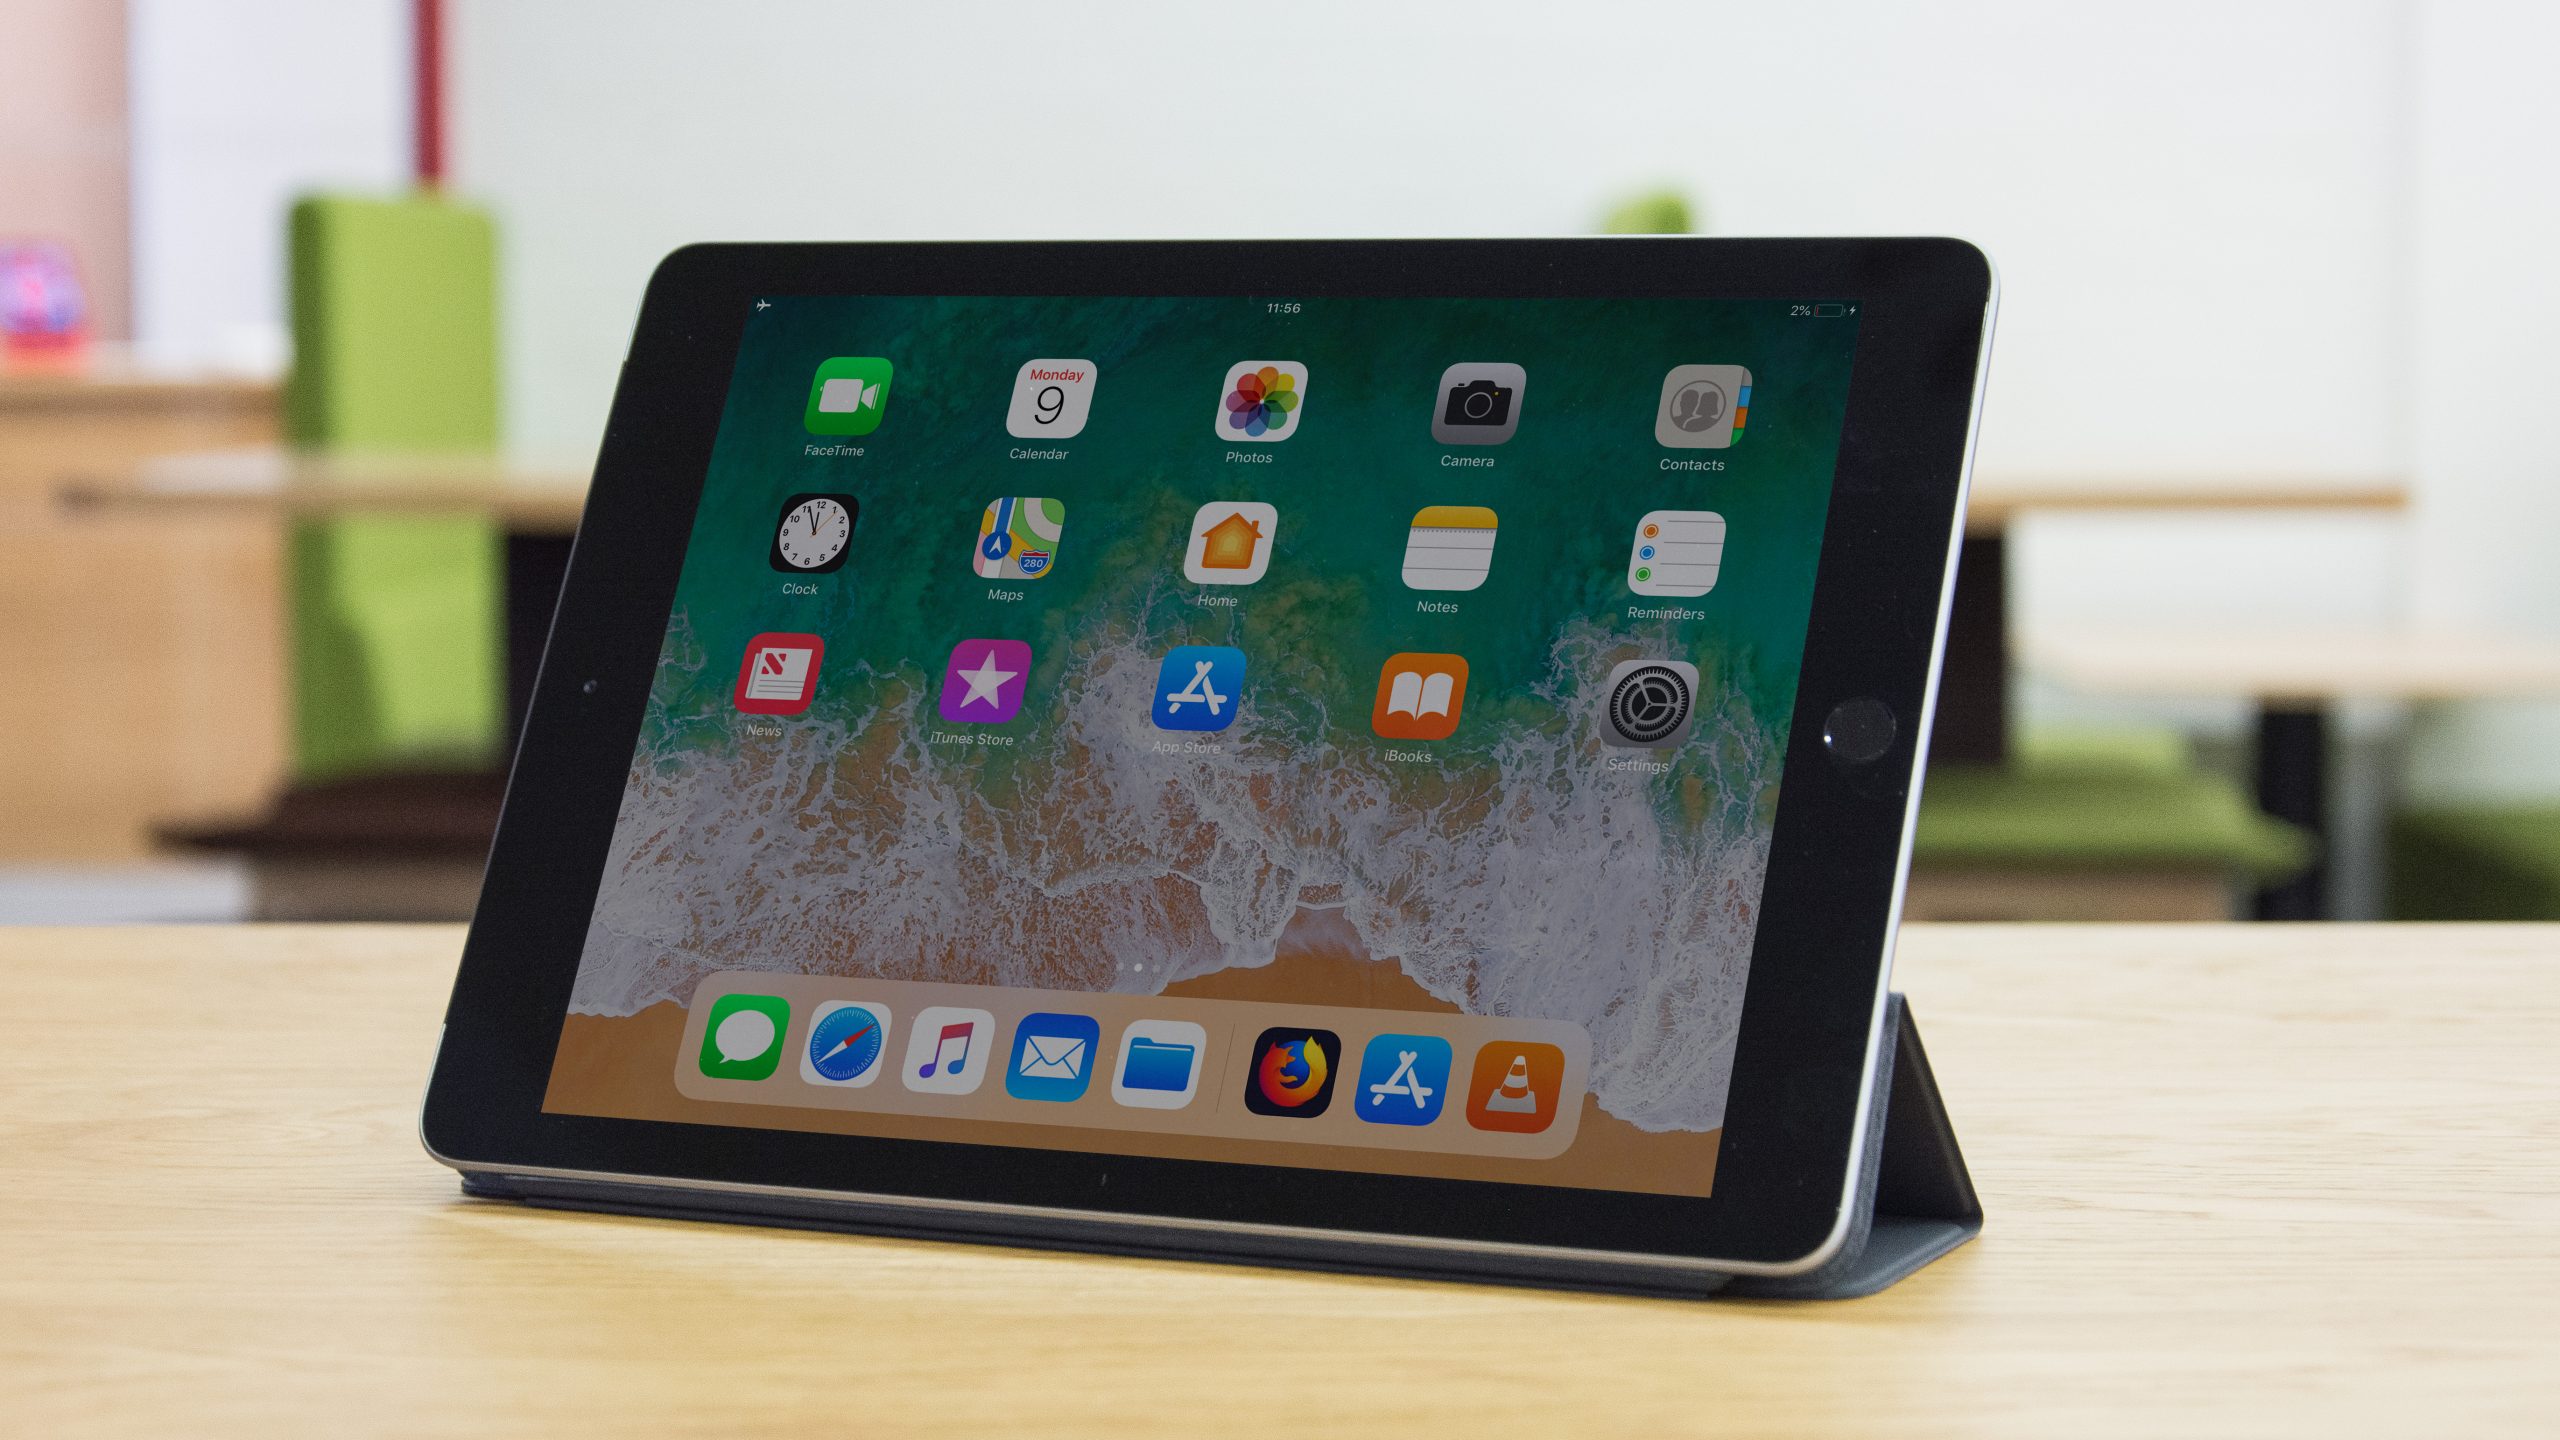 What’s So Great About The Apple Ipad?